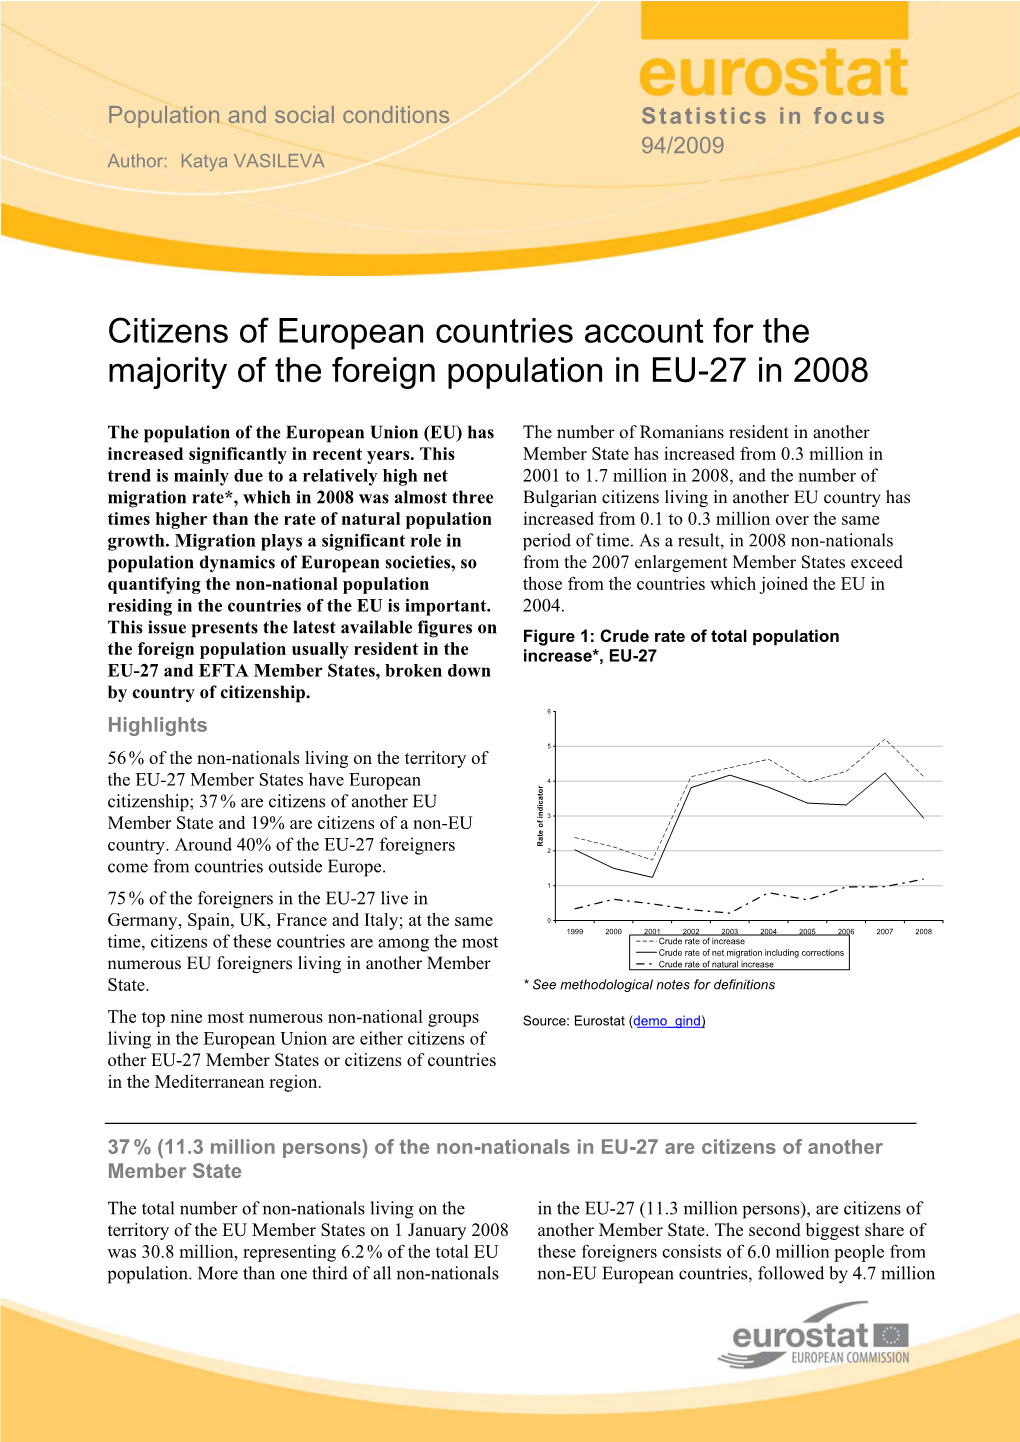 Citizens of European Countries Account for the Majority of the Foreign Population in EU-27 in 2008